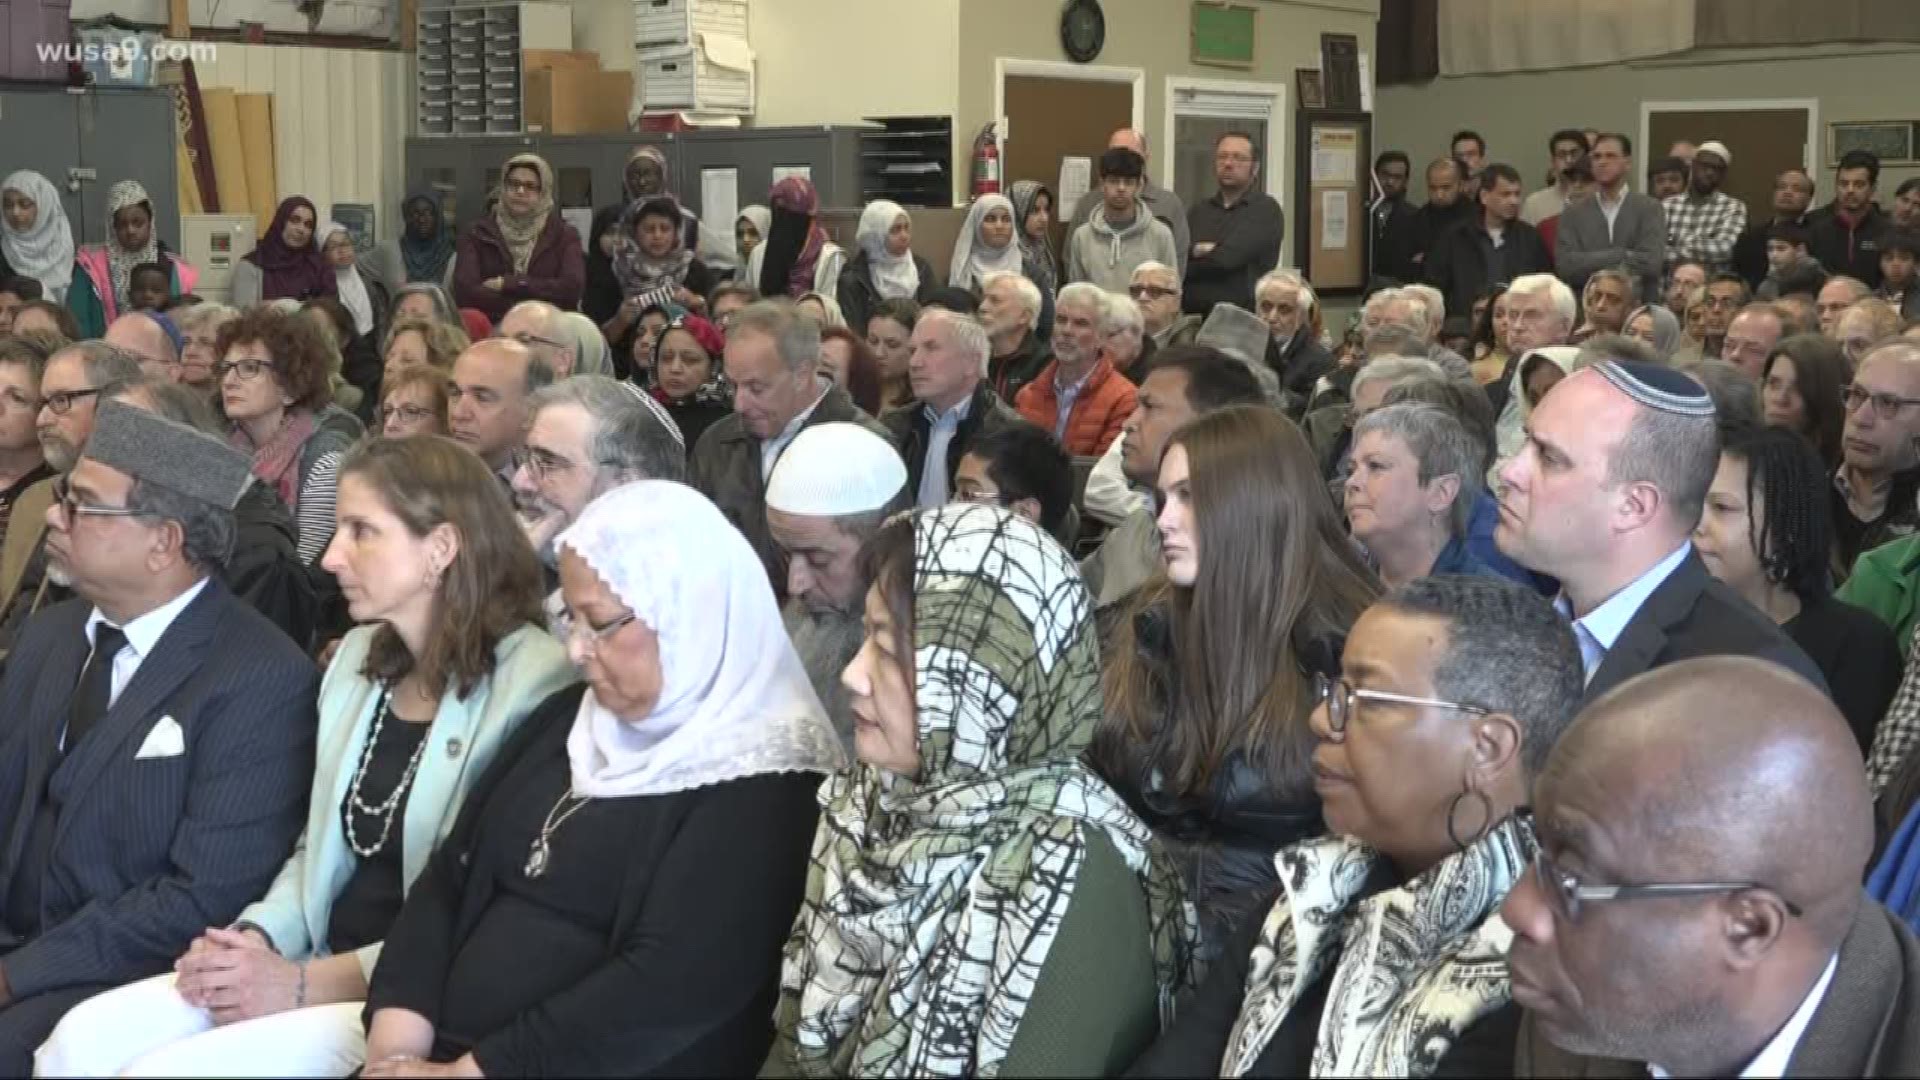 There was standing room only at the Islamic Center of Maryland as faith and county leaders alike gathered in solidarity.